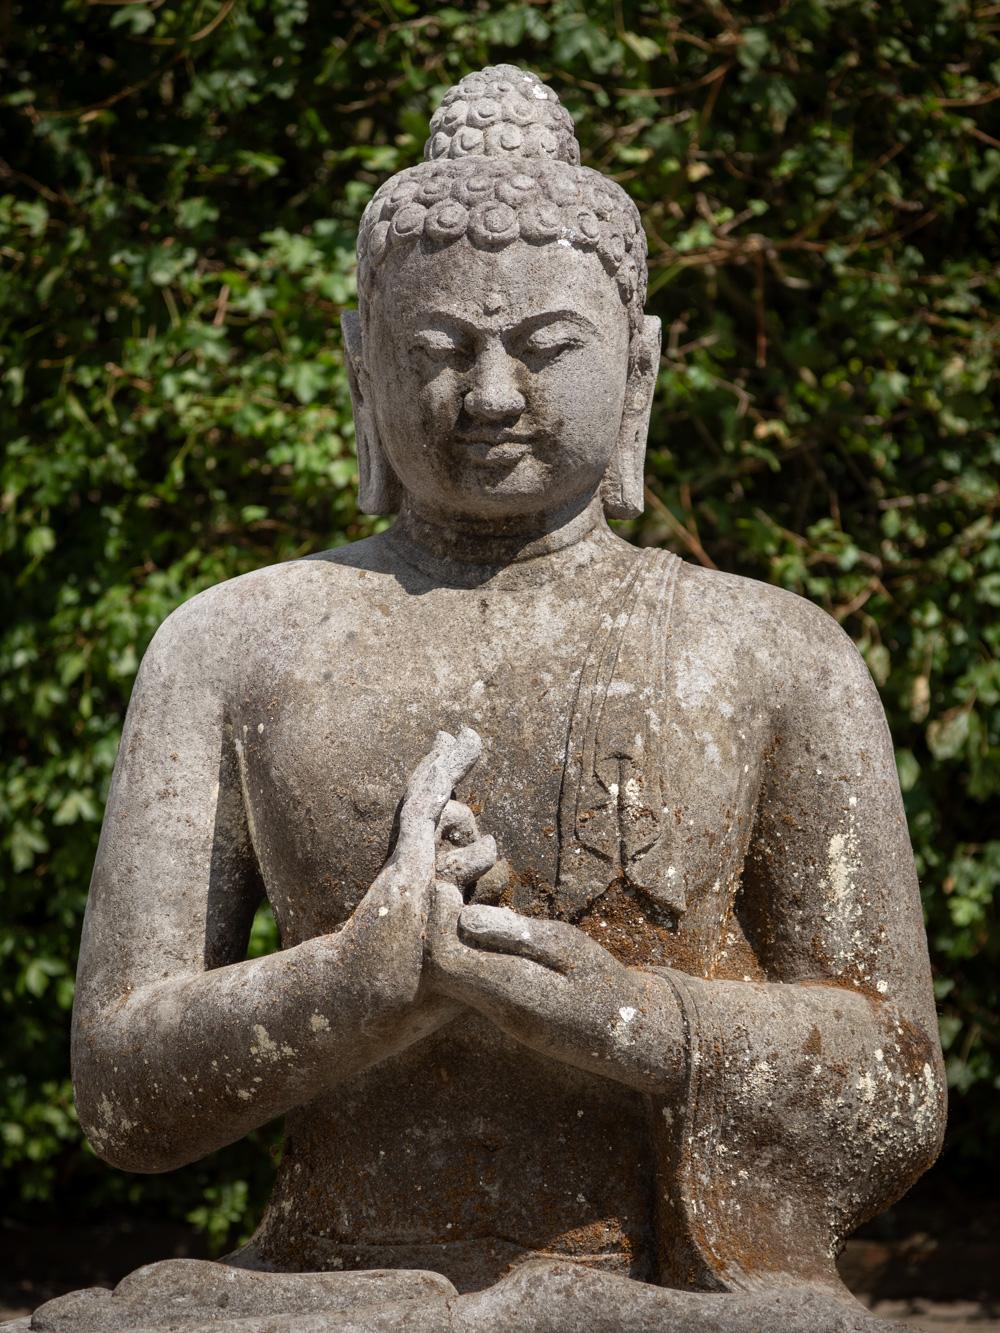 The large old lavastone Buddha statue is a captivating embodiment of spiritual artistry, skillfully carved from the enduring lavastone material. Standing at an impressive height of 125 cm, with dimensions of 98 cm in width and 70 cm in depth, its